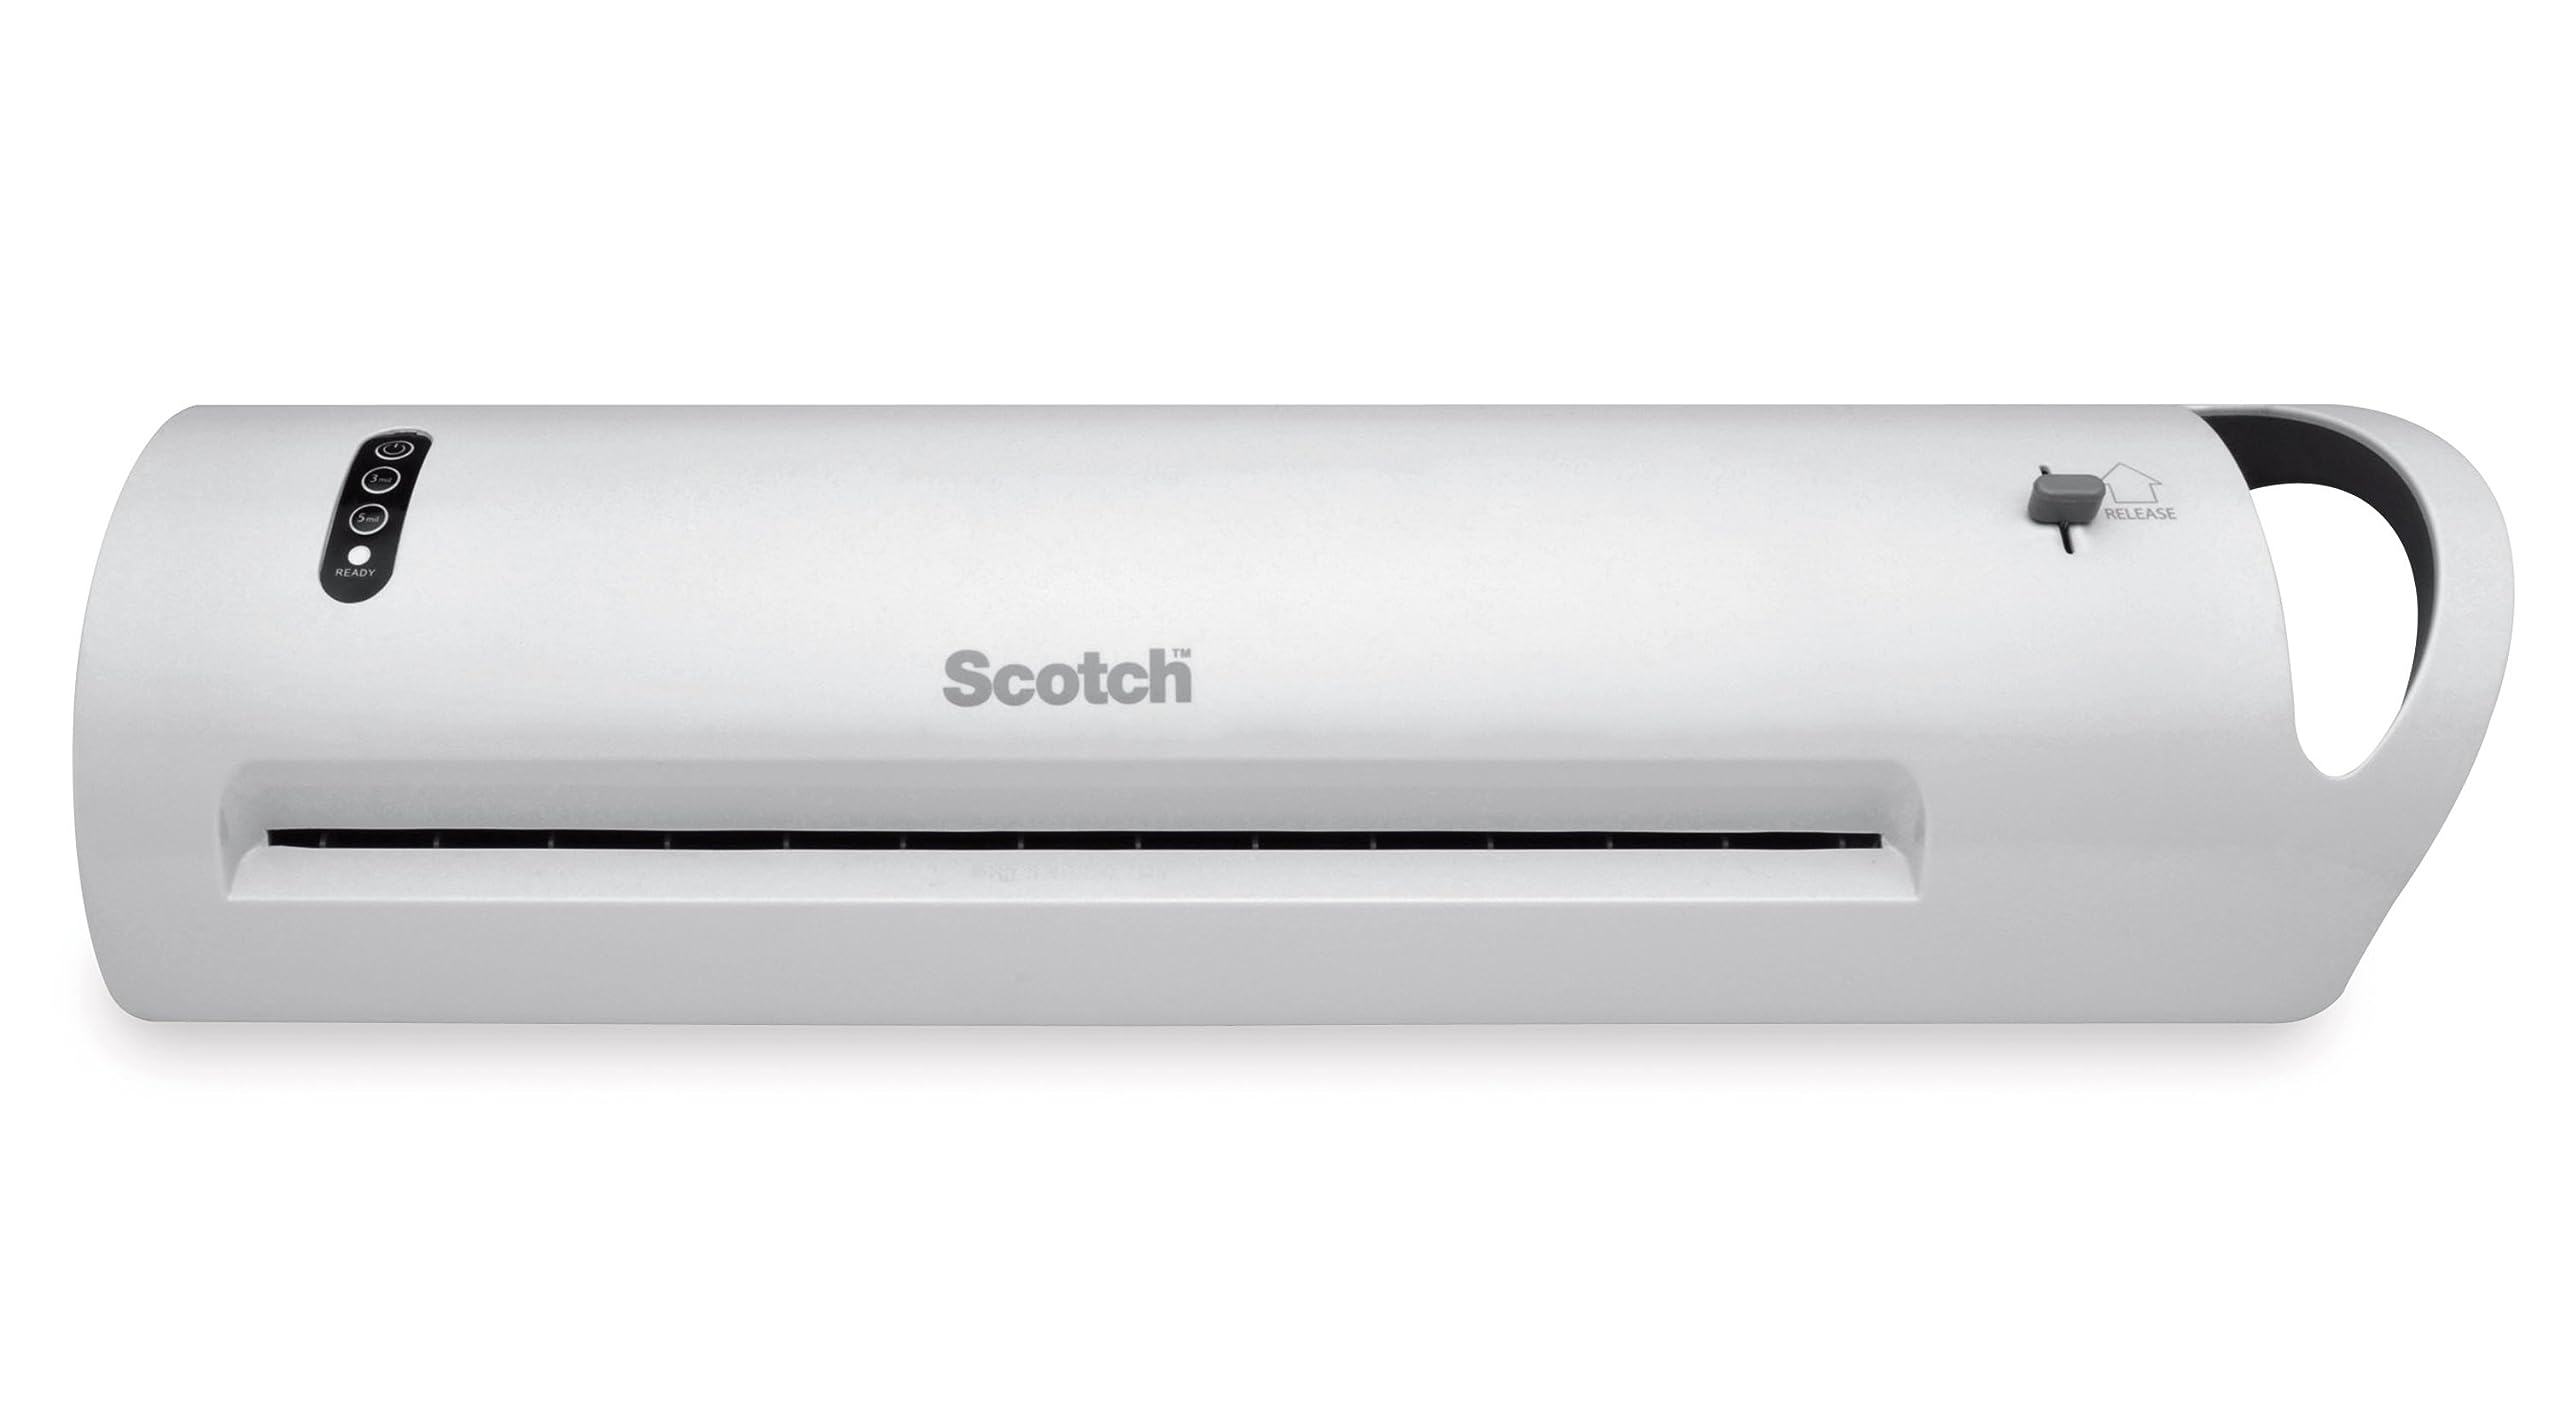 Scotch Thermal Laminator, Extra Wide 13 Inch Input, Ideal Gift for Teachers, Small Offices, or Home (TL1302X)